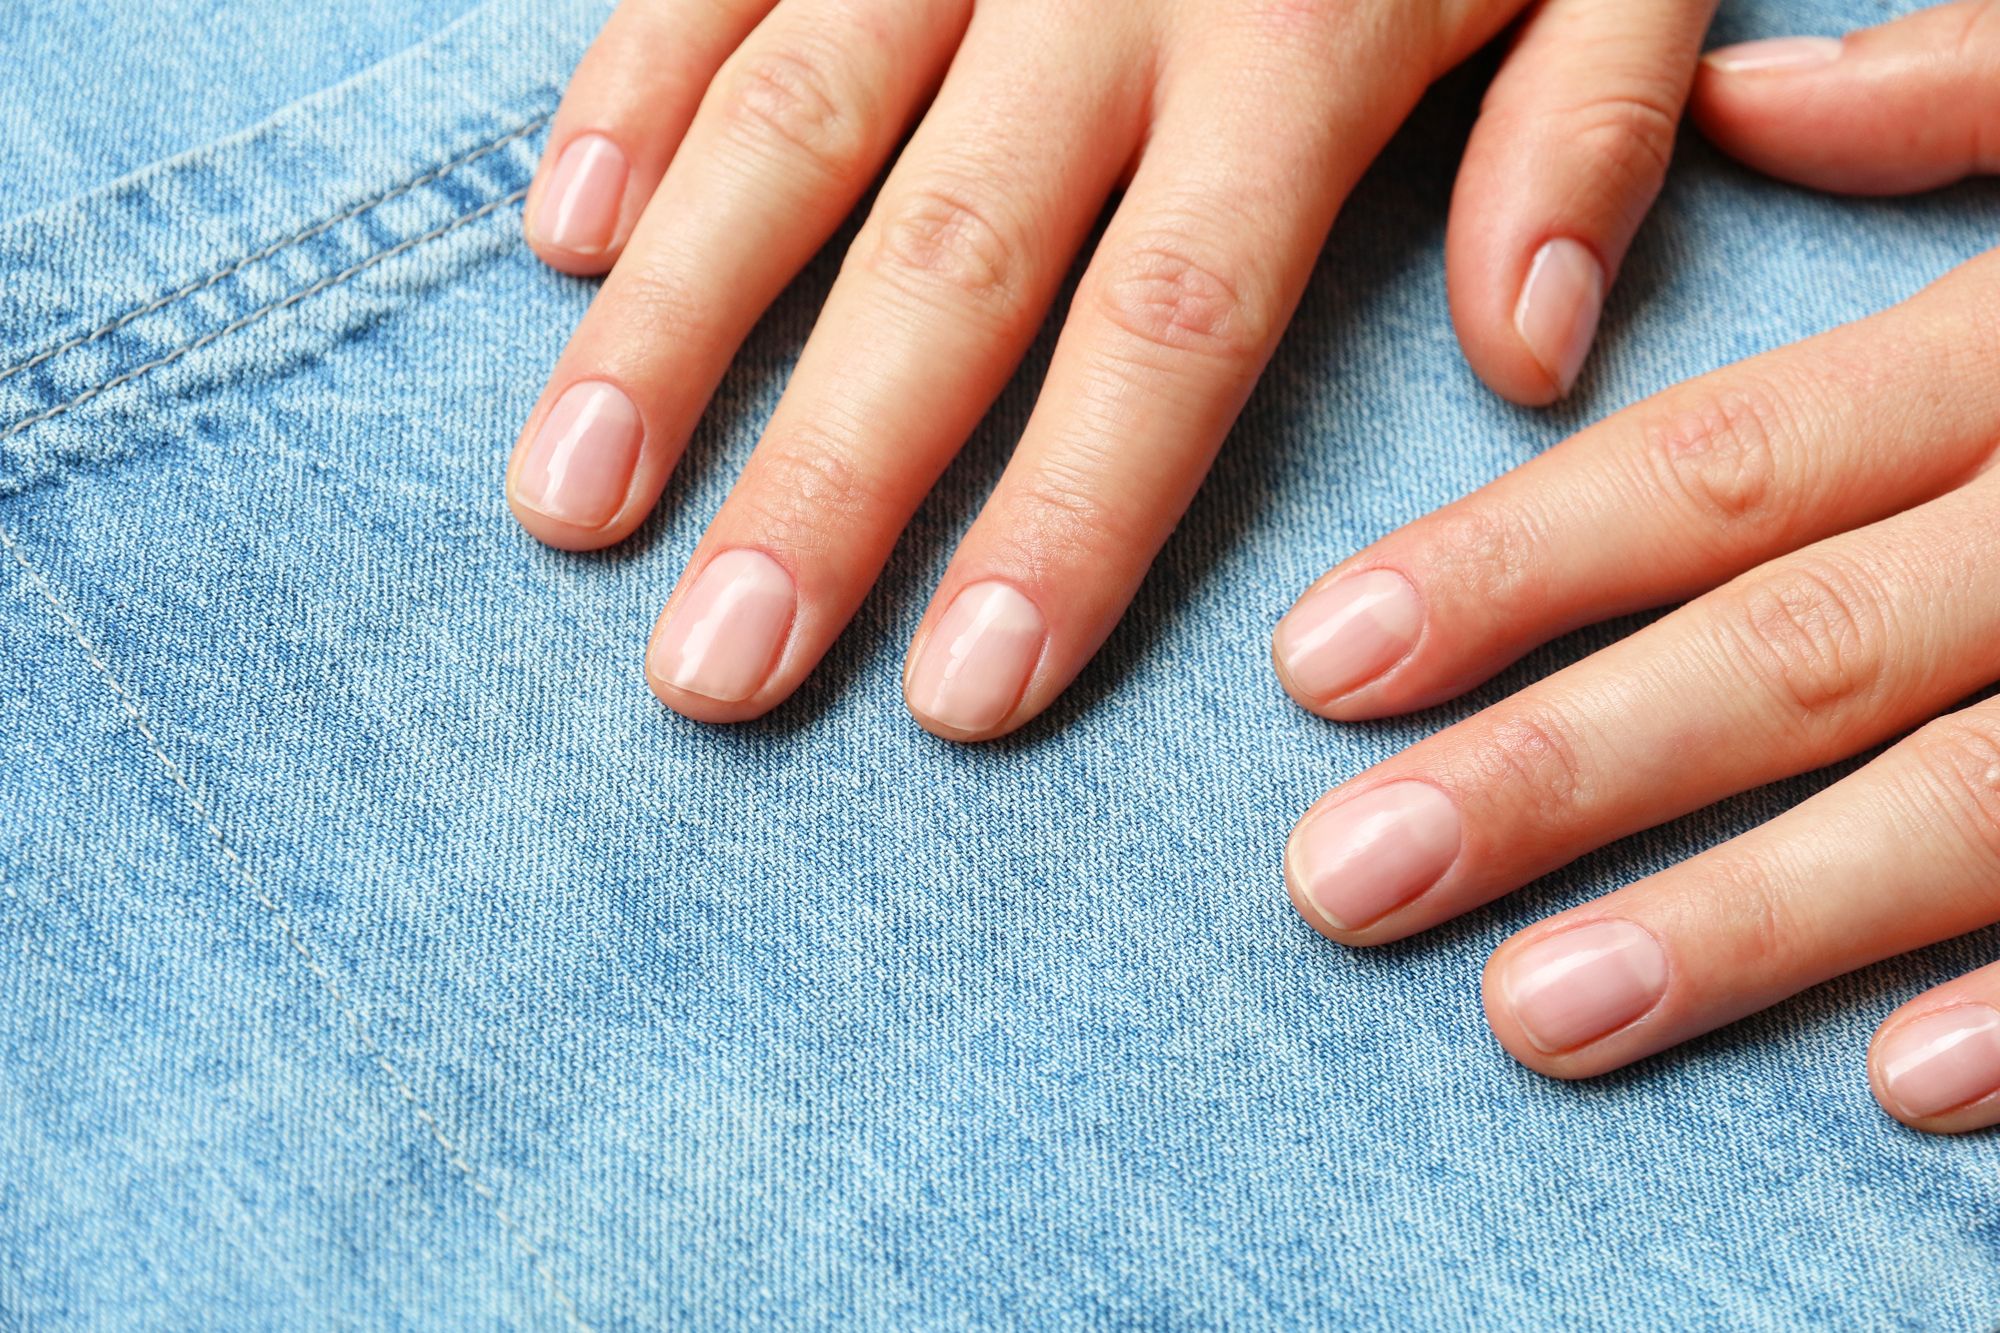 16 Things Your Nails Can Say About Your Health / Bright Side